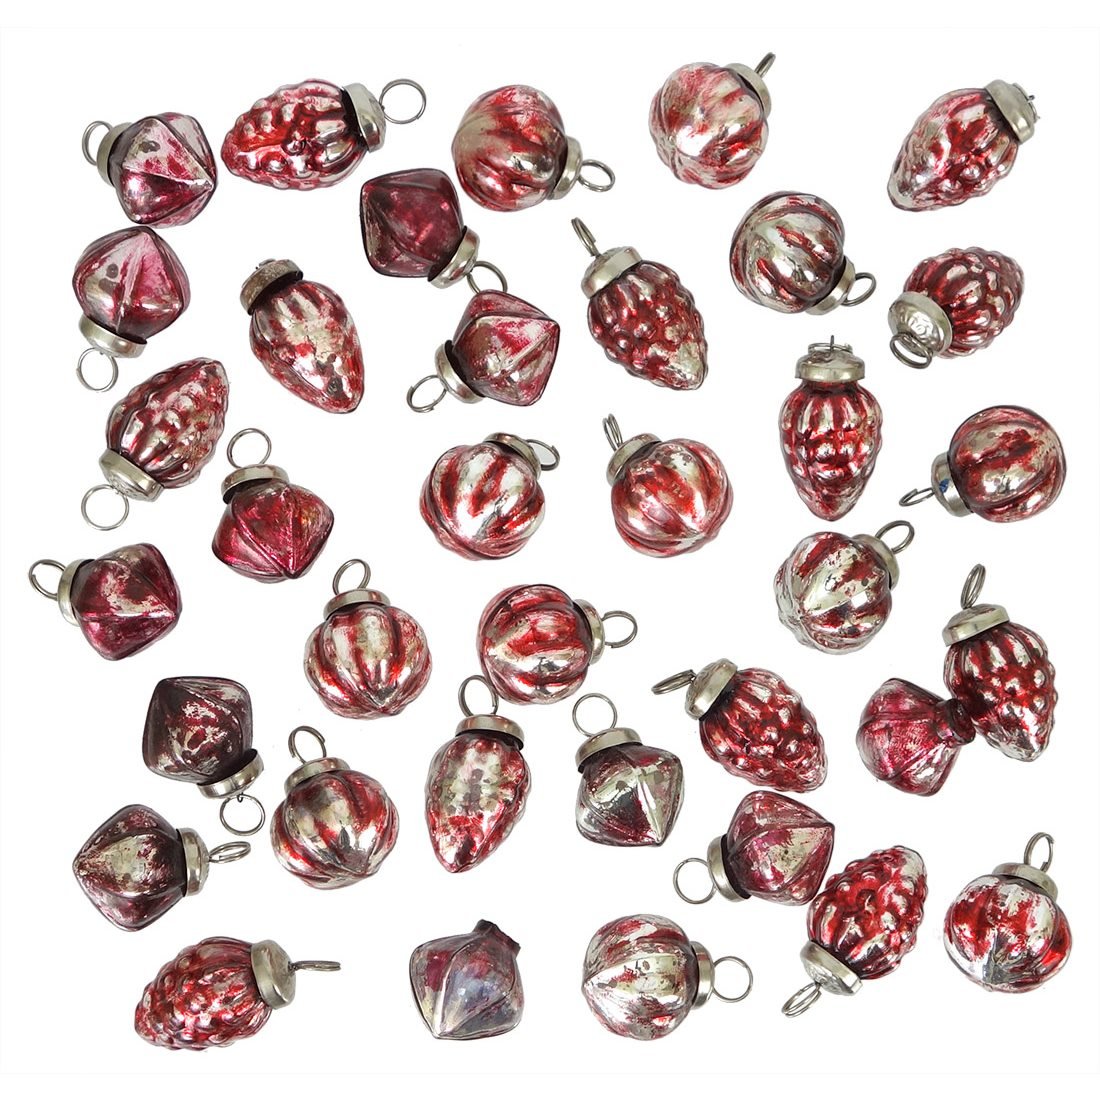 Silver and Red Mercury Shaped Ornaments